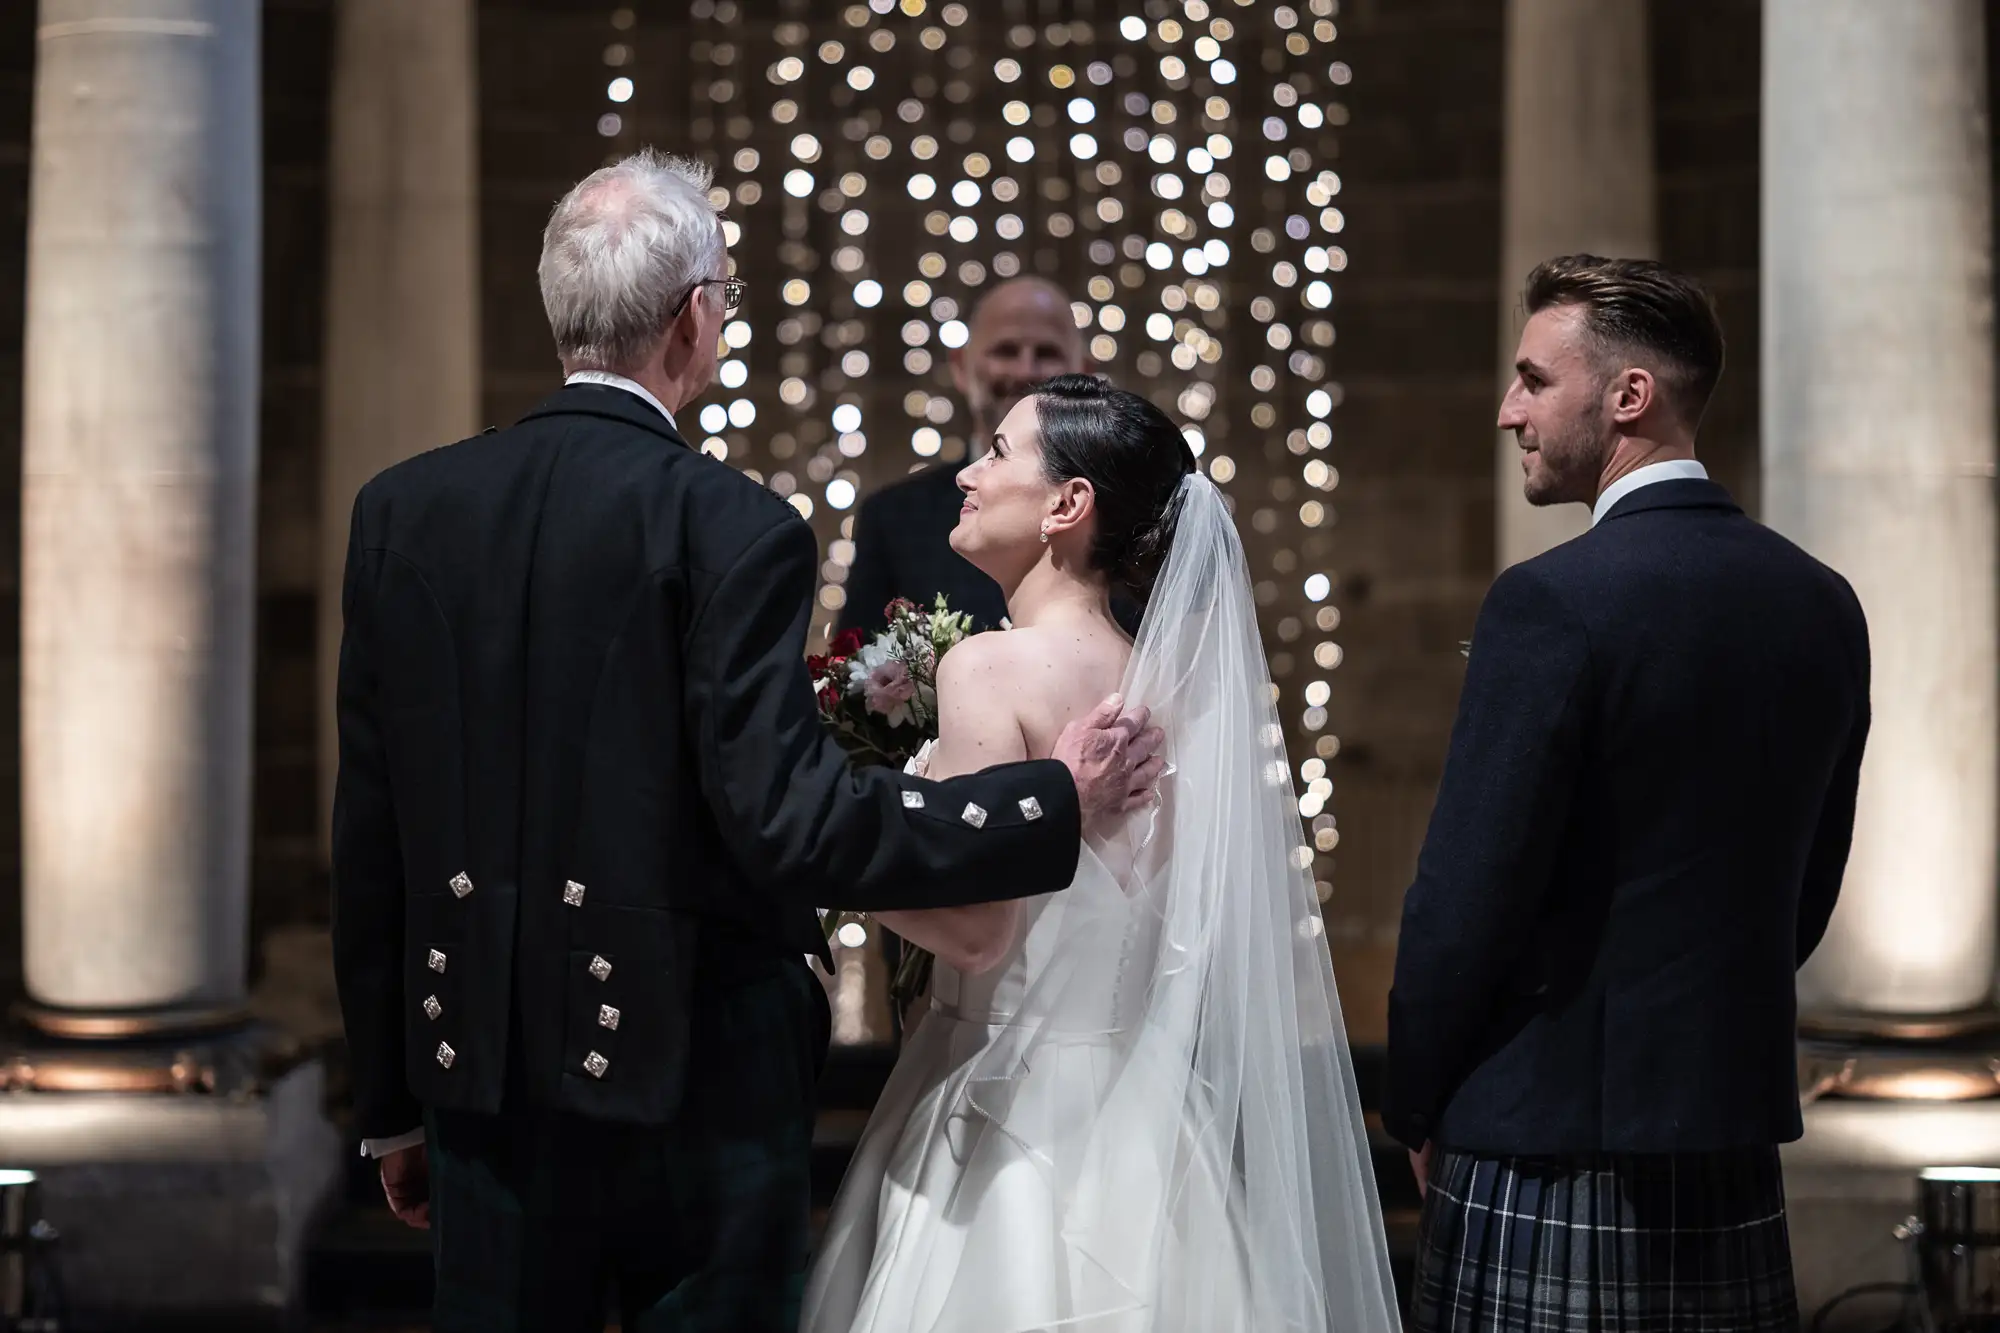 A bride in a white dress and a groom in a kilt stand at the altar, exchanging vows in front of an officiant, with twinkling lights in the background.